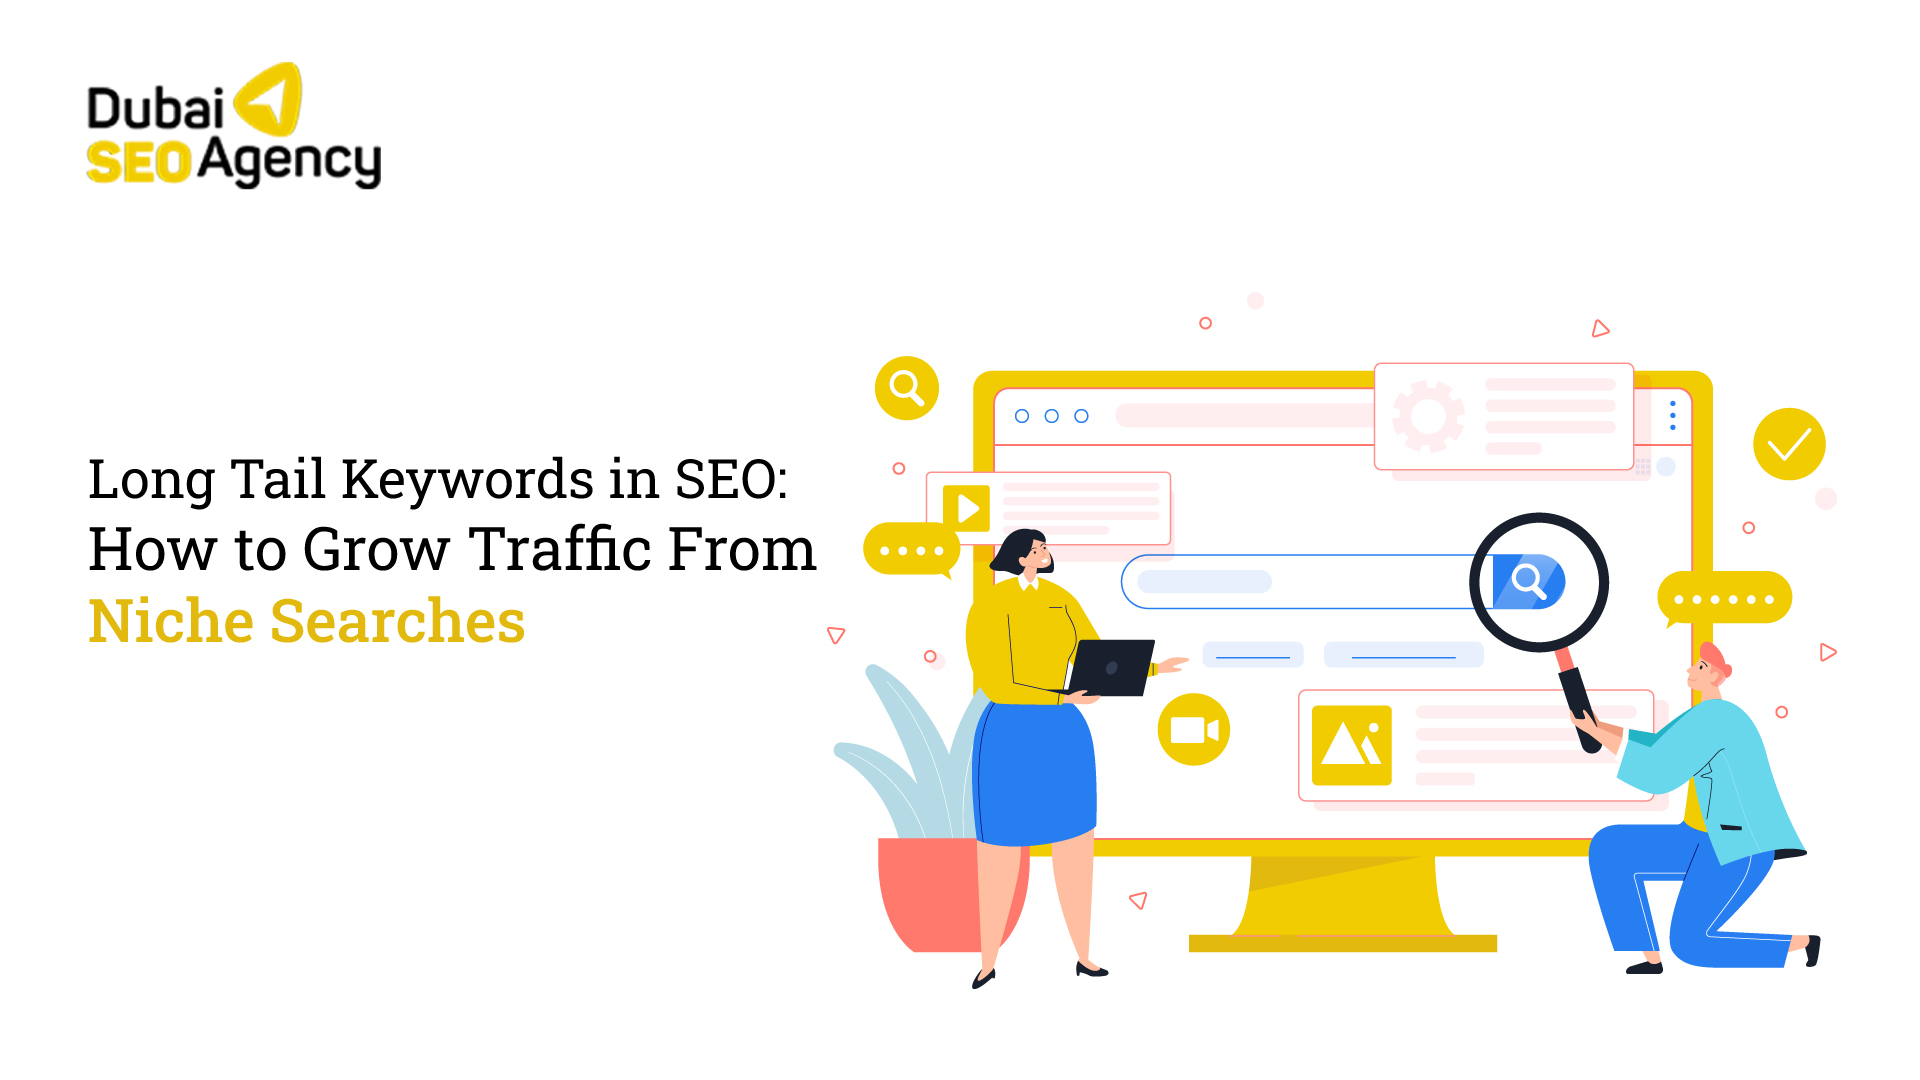 Long Tail Keywords in SEO: How to Grow Traffic From Niche Searches